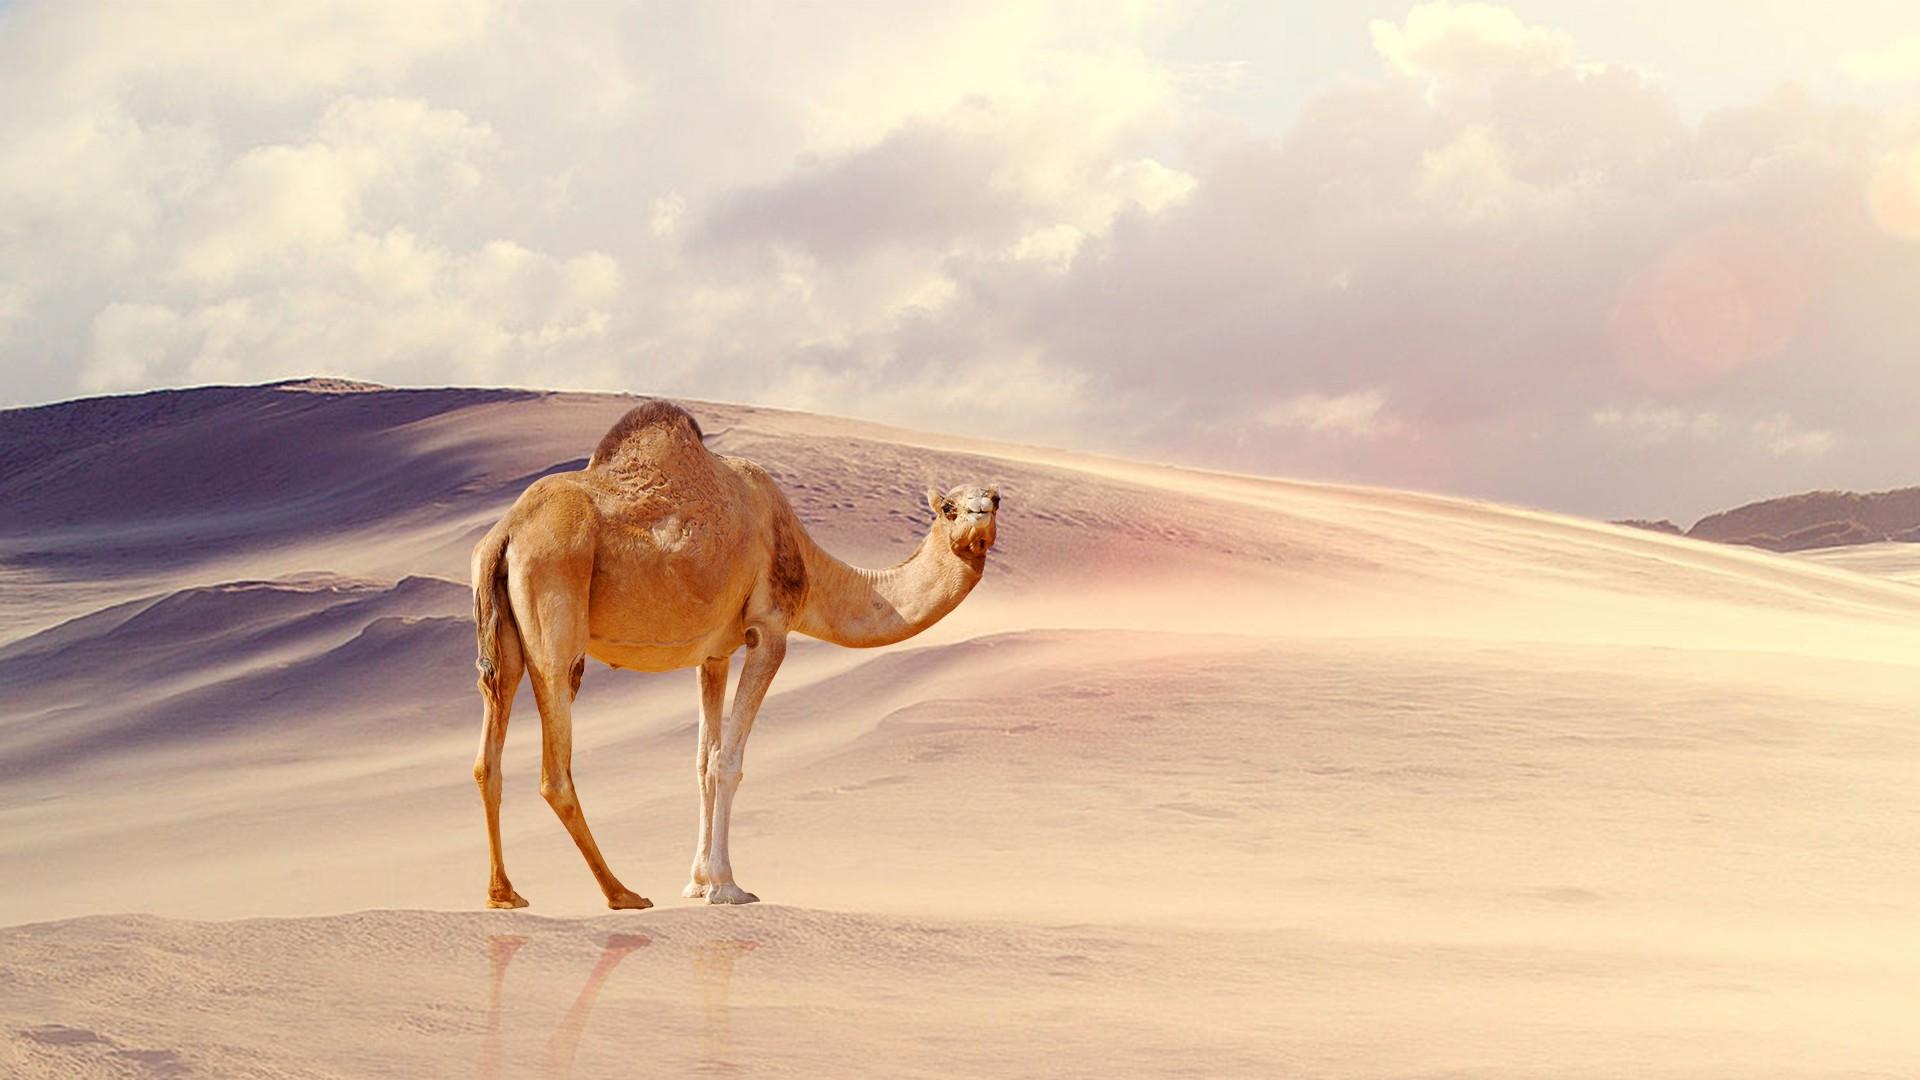 Camel Wallpaper HD Background, Image, Pics, Photo Free Download